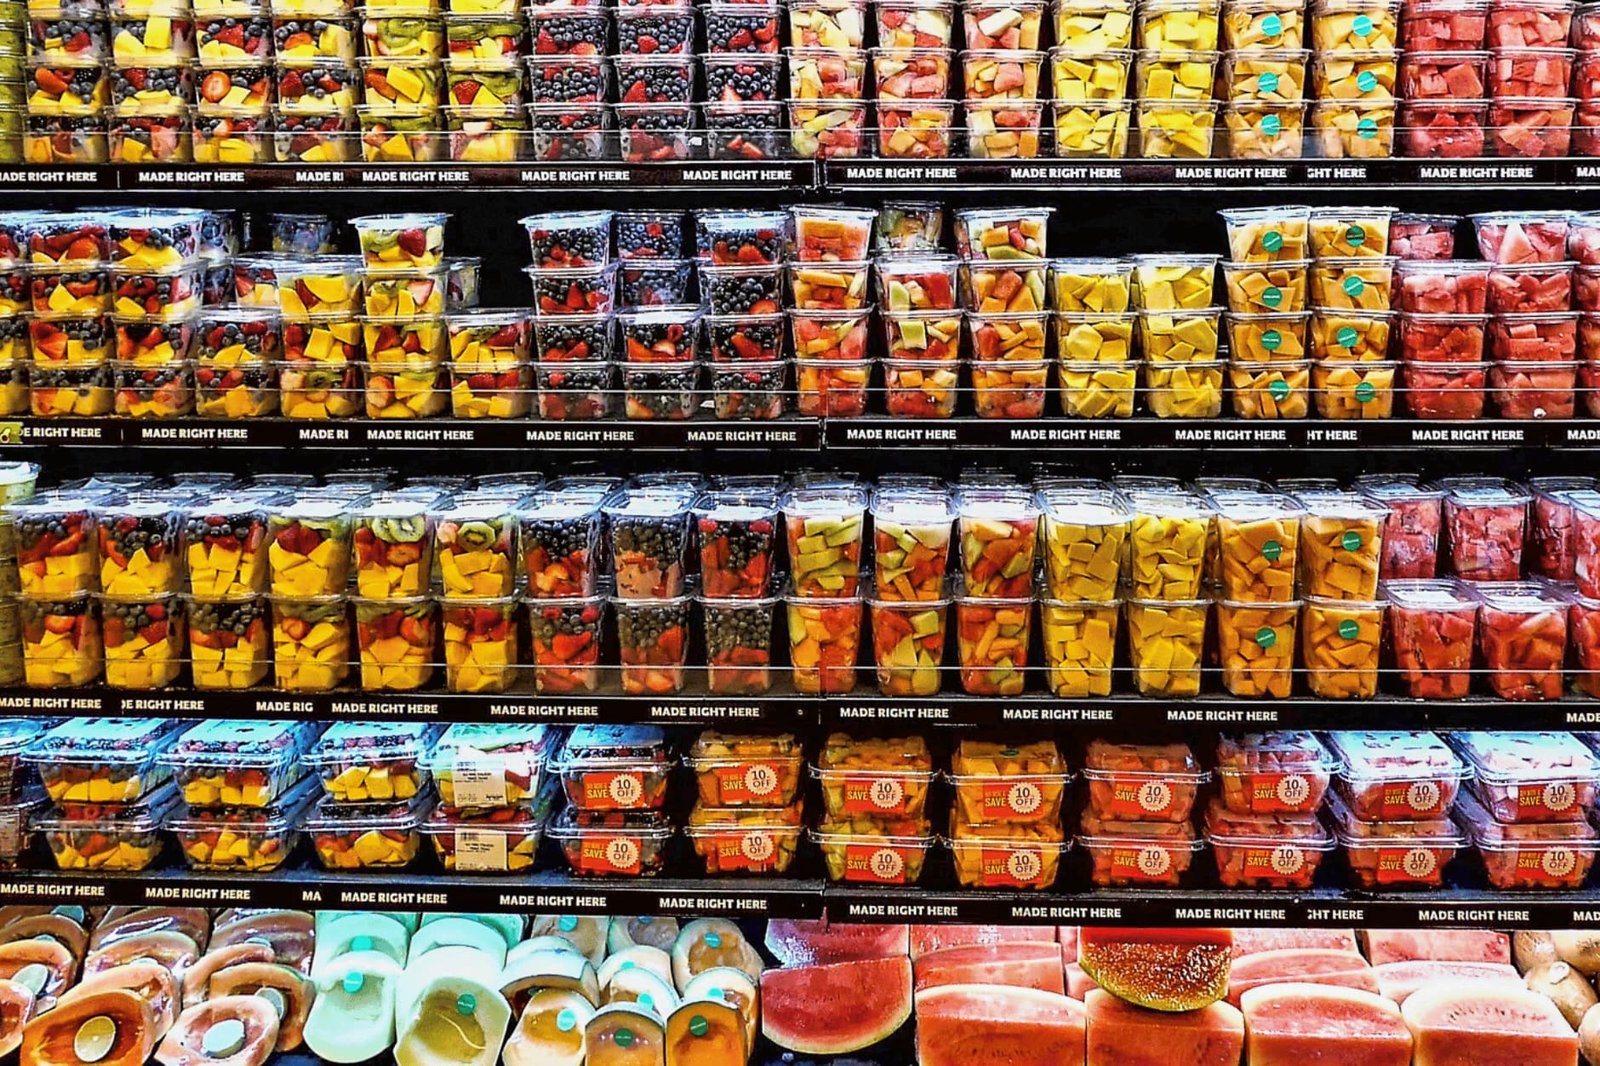 Beyond Price and Convenience: The Role of Emotion in Supermarket Shopping